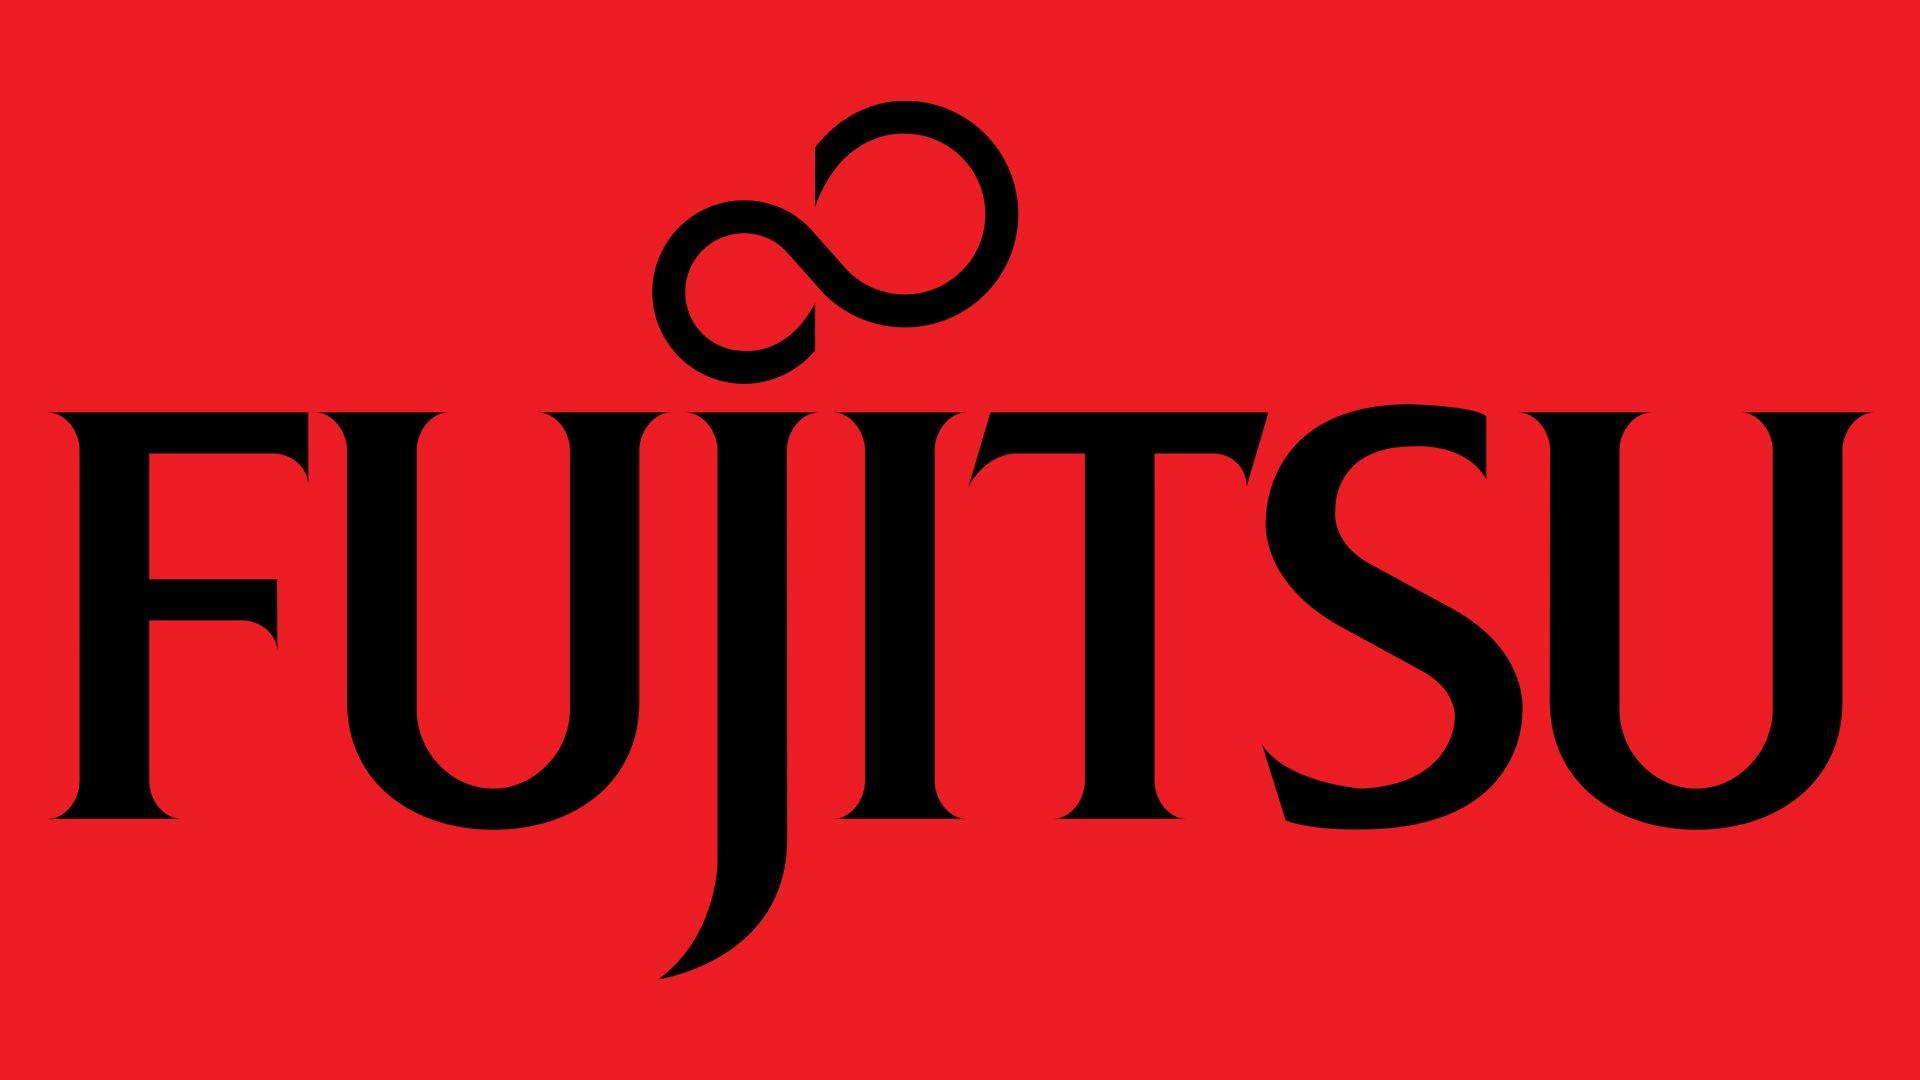 Fujitsu Logo - Fujitsu Logo, Fujitsu Symbol, Meaning, History and Evolution